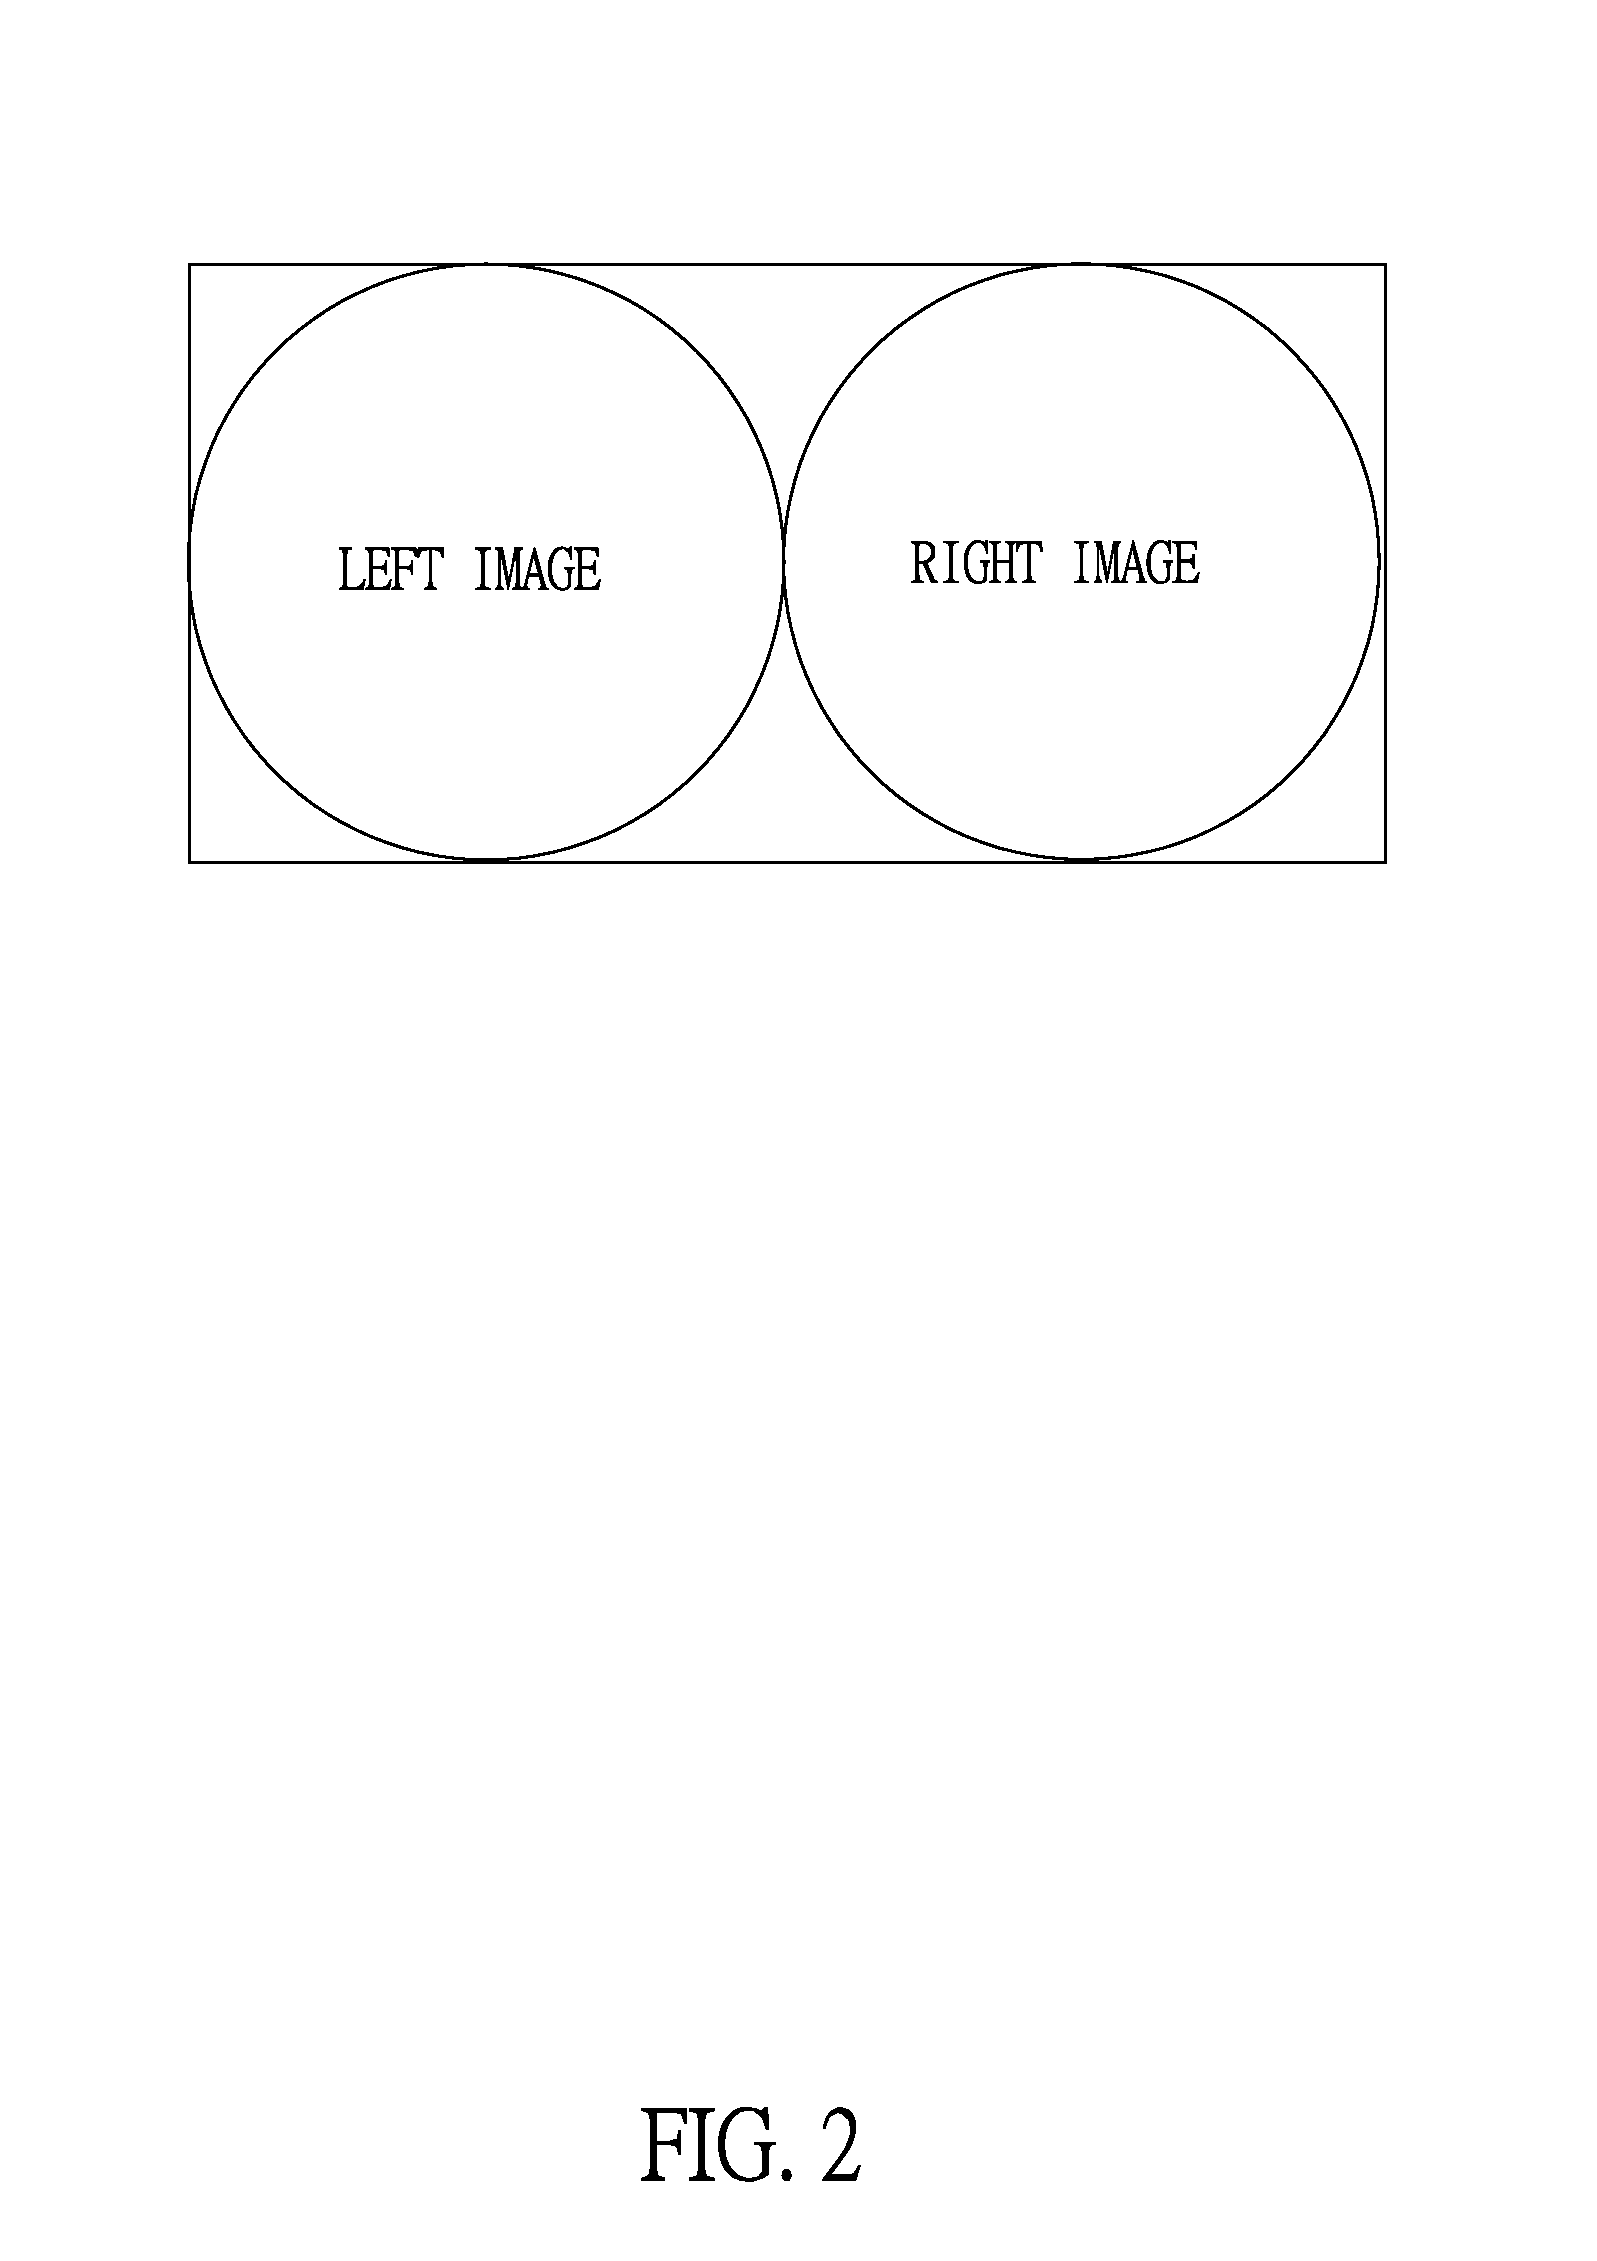 Stereoscopic vision system generatng stereoscopic images with a monoscopic endoscope and an external adapter lens and method using the same to generate stereoscopic images